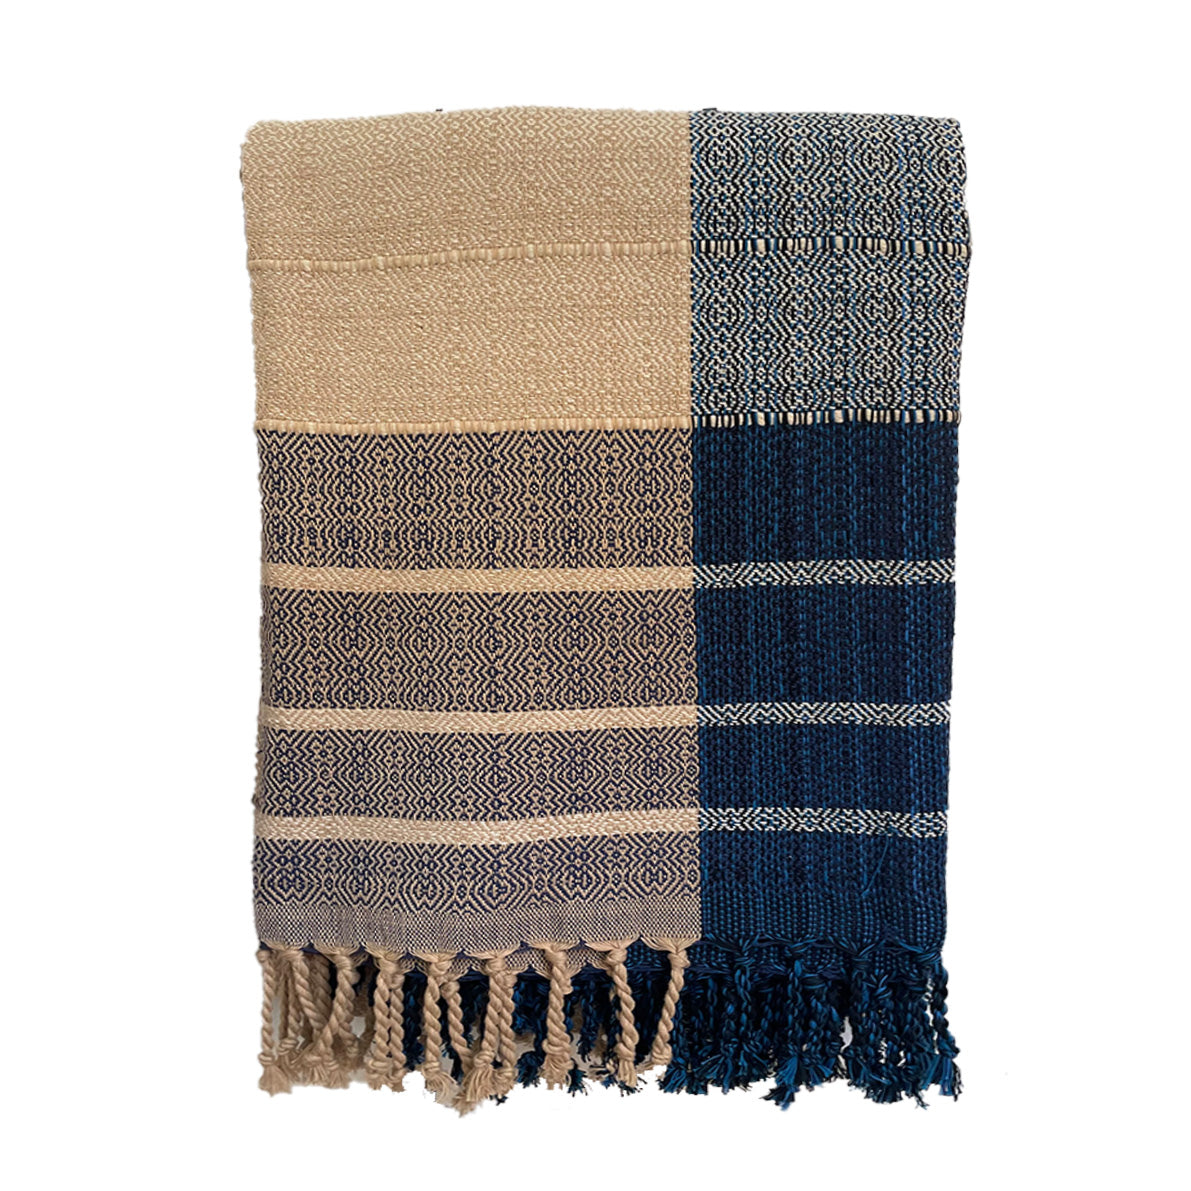 Handwoven Blue with gold throw